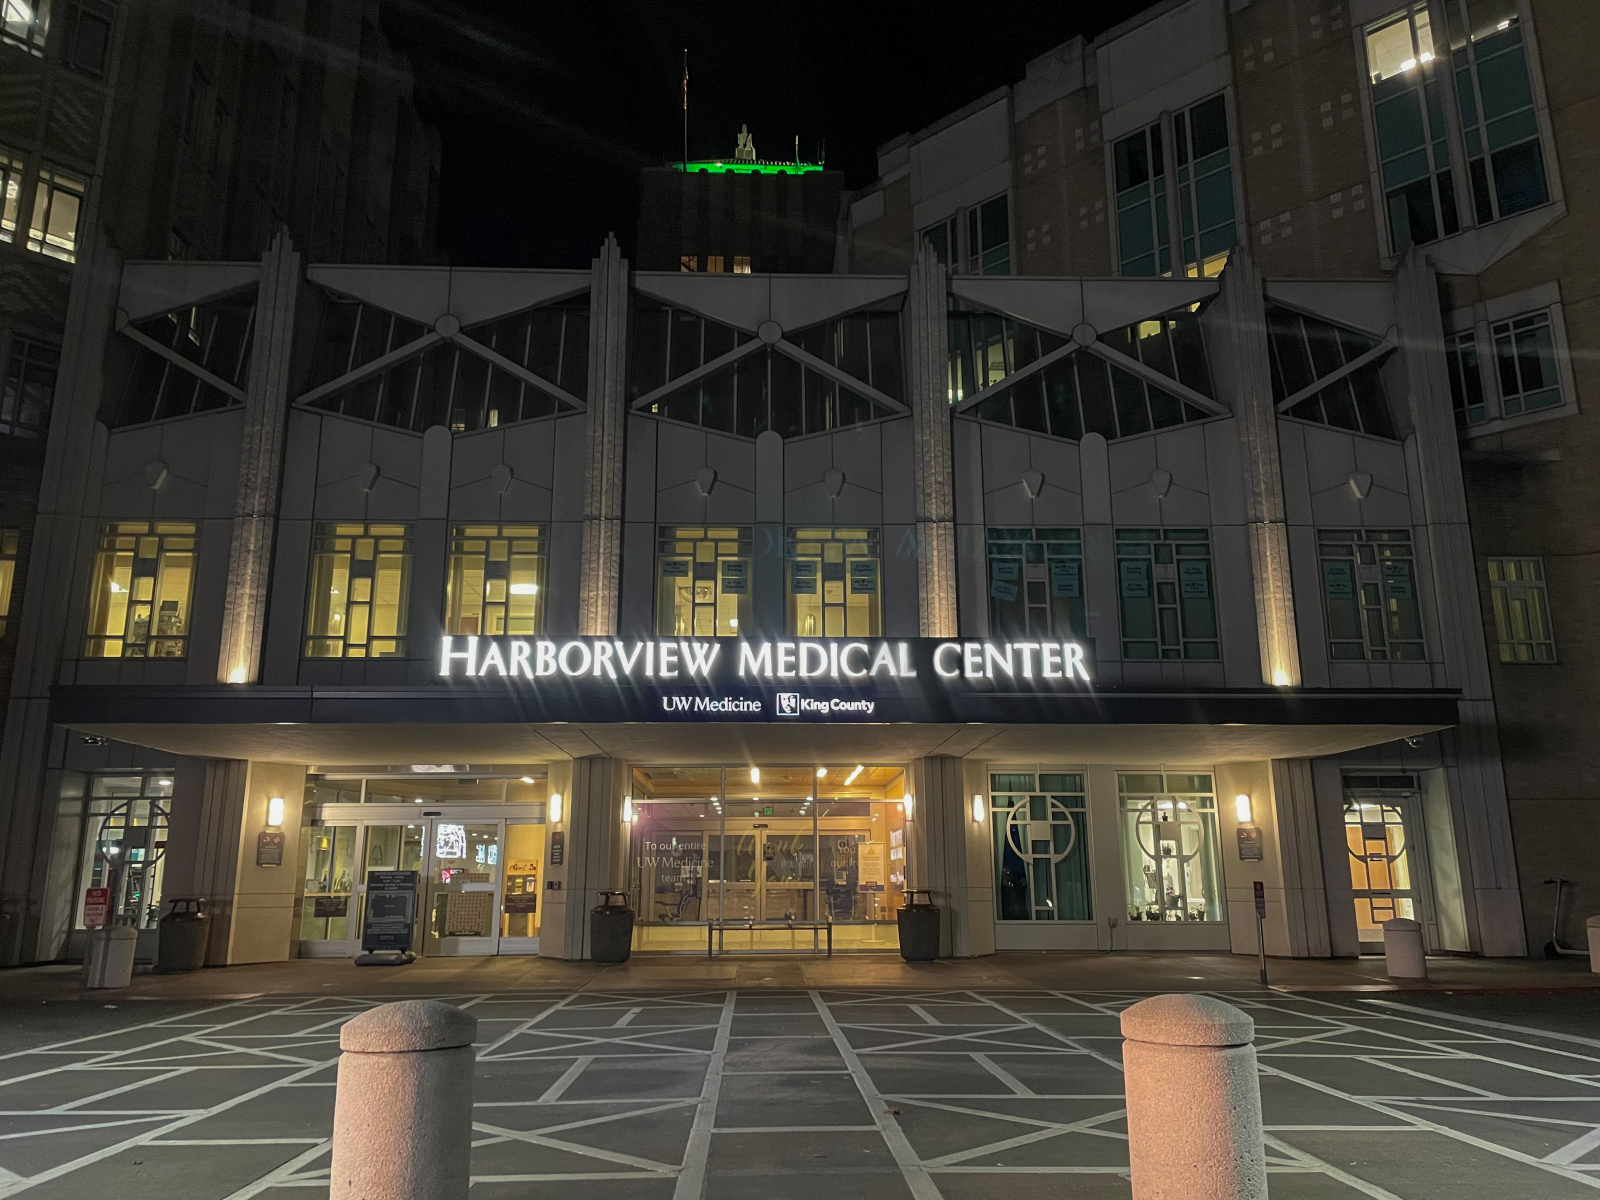 Harborview Medical Center illuminated in green in honor of National Injury Prevention Day.